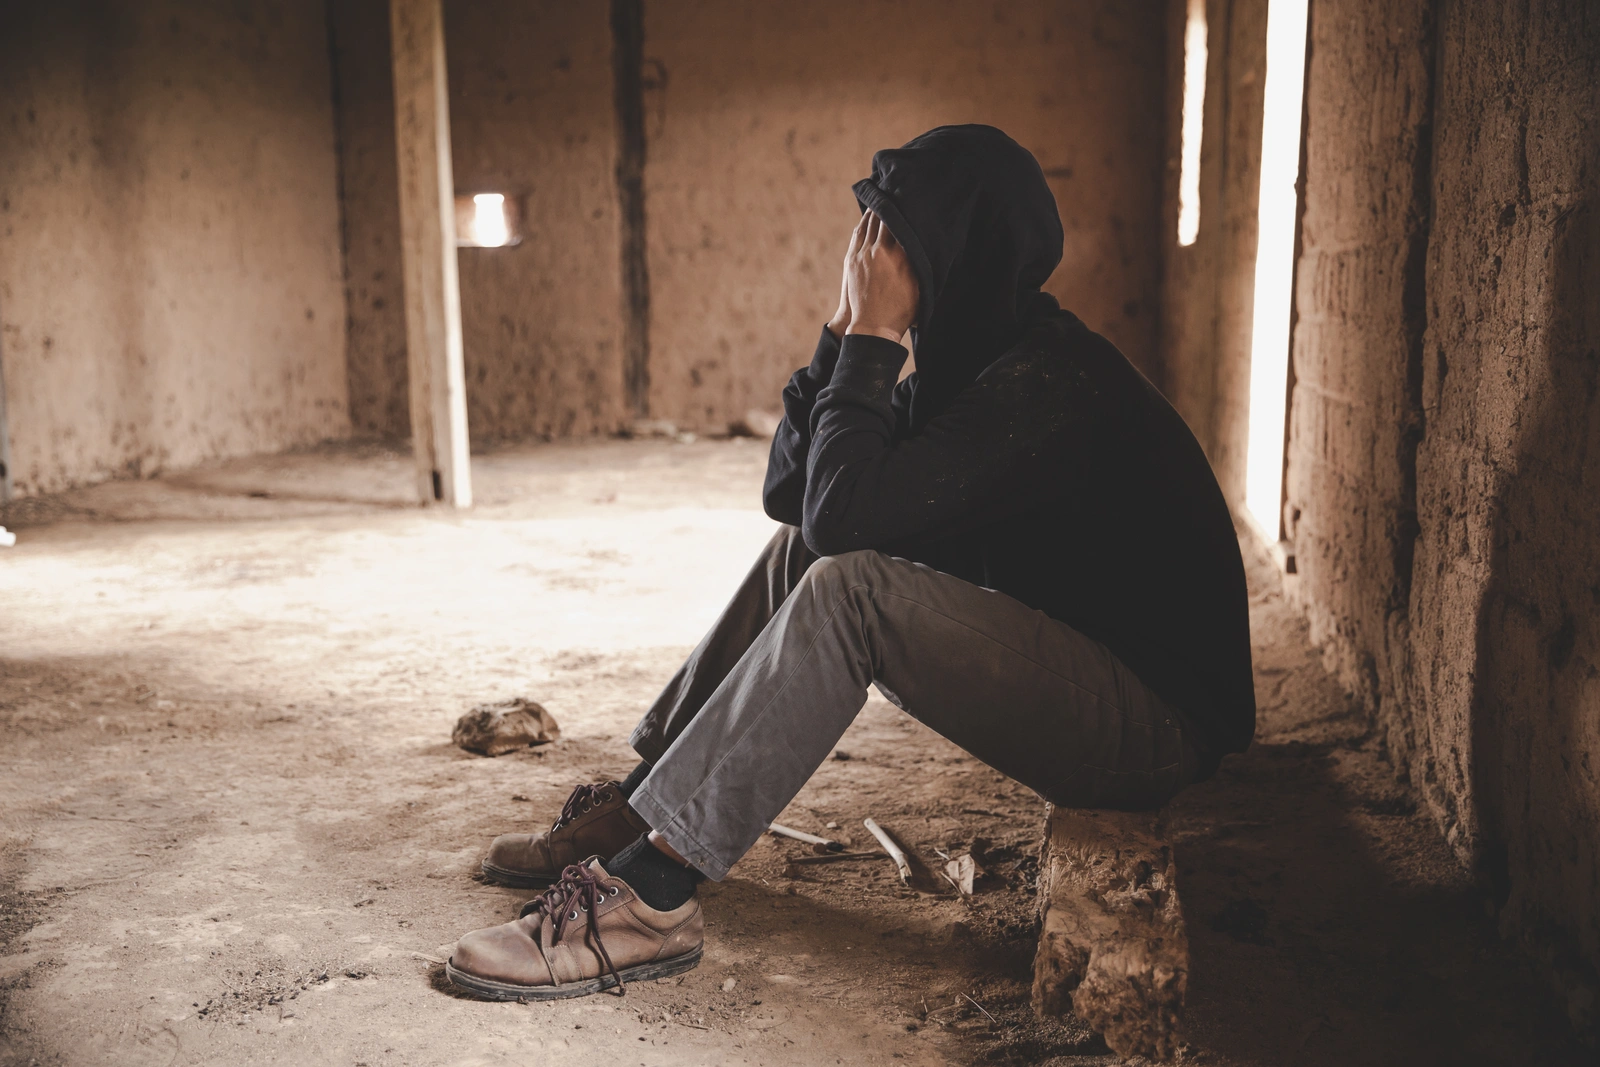 a man sitting in a worn down building struggling with addiction